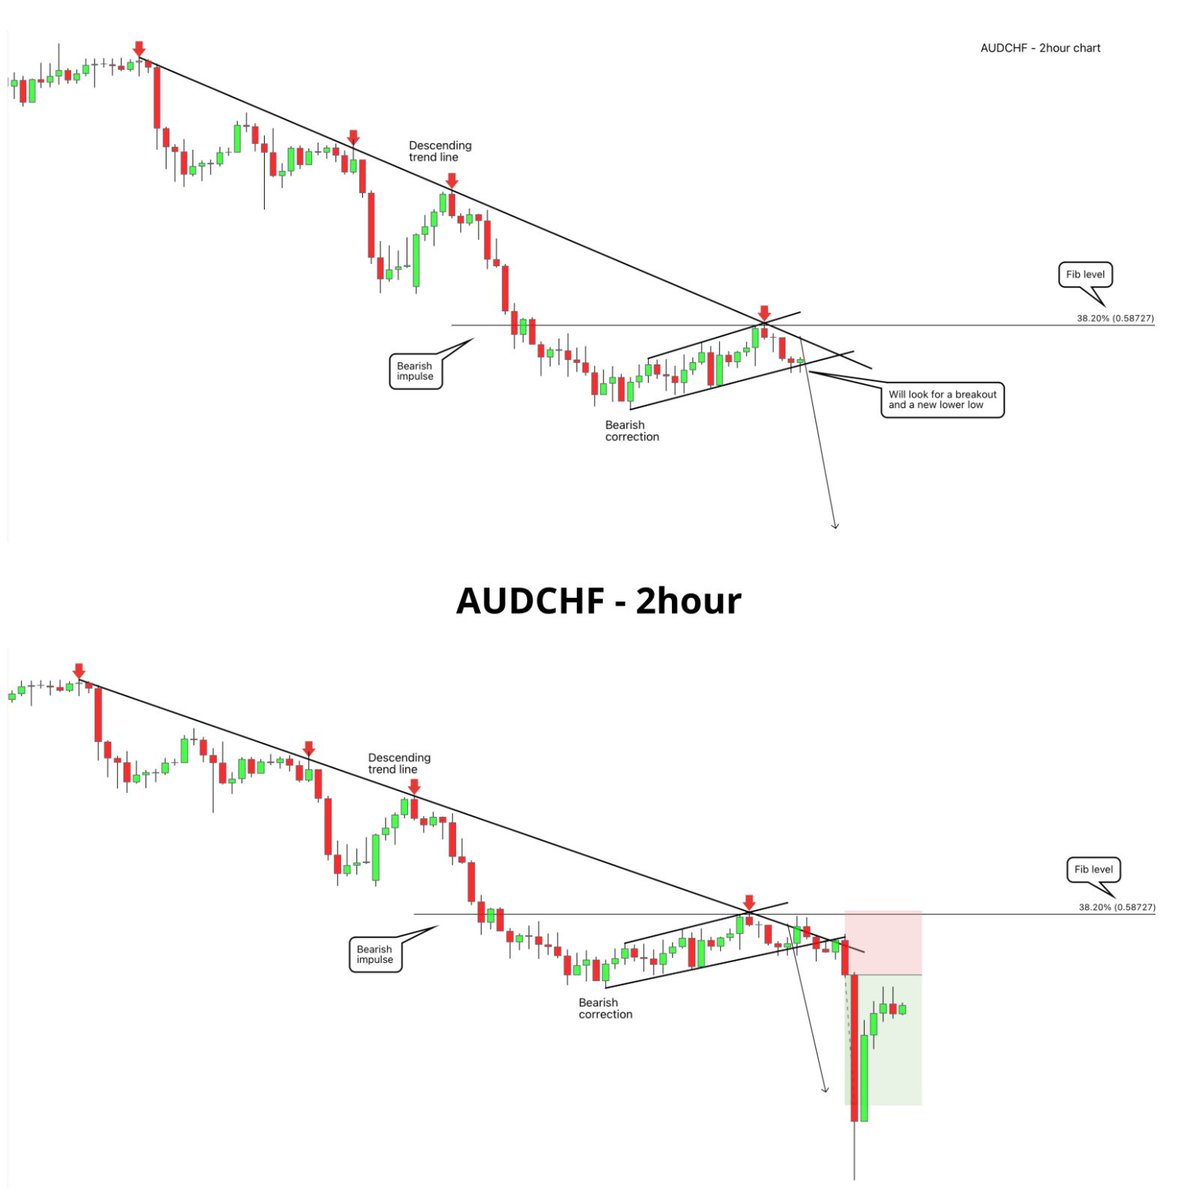 #audchf provided a fast bearish continuation move this week.

Price reversed from a descending trend line and it broke out of a bearish correction.

Price made a new lower low as anticipated📉

Sign up to our membership:
gum.co/ninjafx